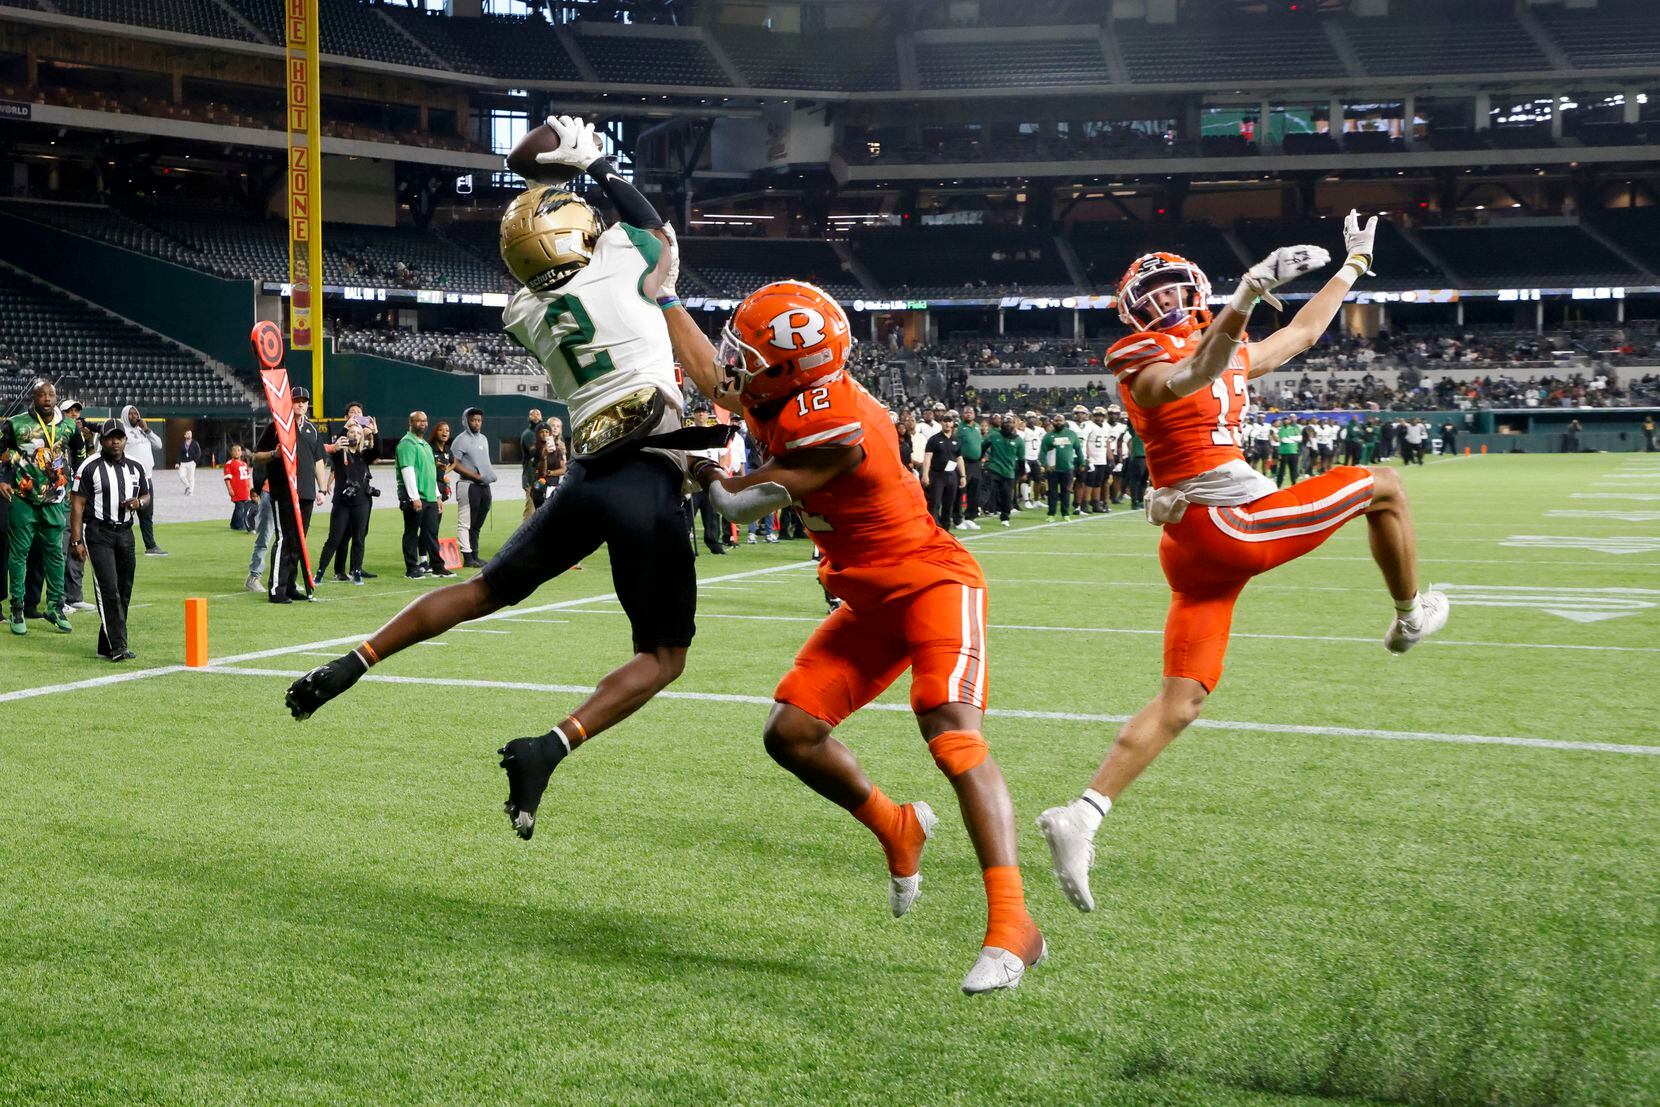 DeSoto receiver Mike Murphy makes a touchdown reception in front of Rockwall defenders Kevin...